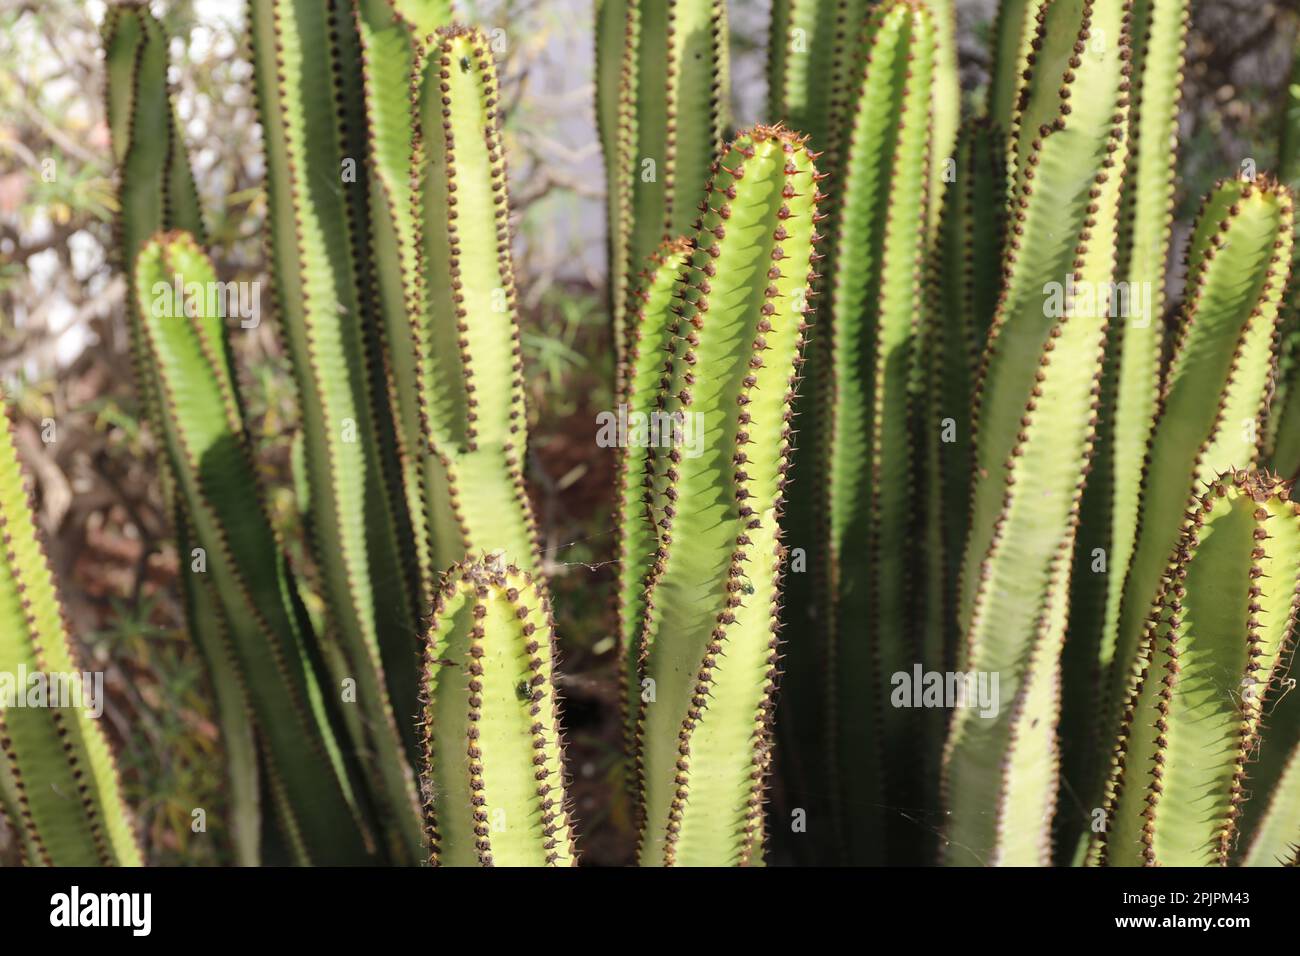 Close-up detail of the Euphorbia Canariensis cactus Stock Photo